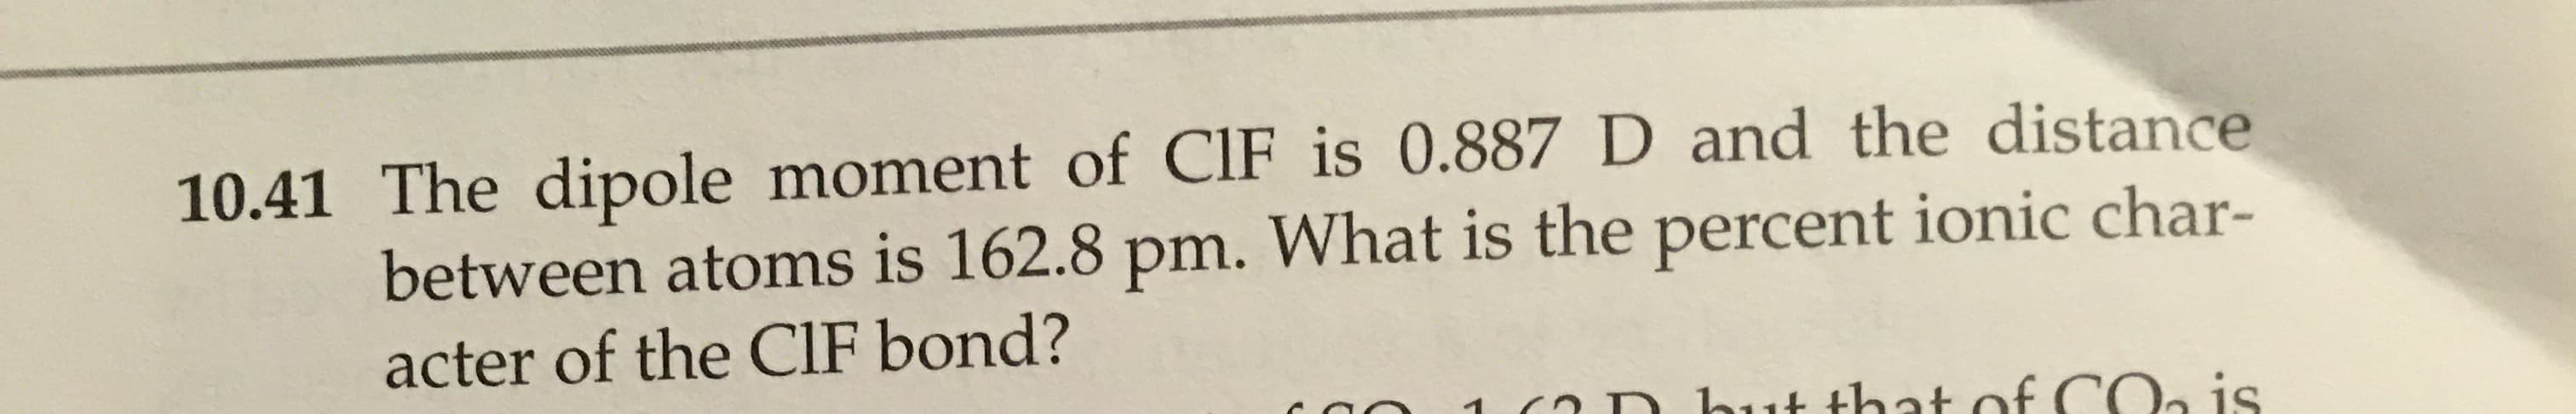 The dipole moment of CIF is 0.887 D and the distance
between atoms is 162.8 pm. What is the percent ionic char-
acter of the CIF bond?
is
